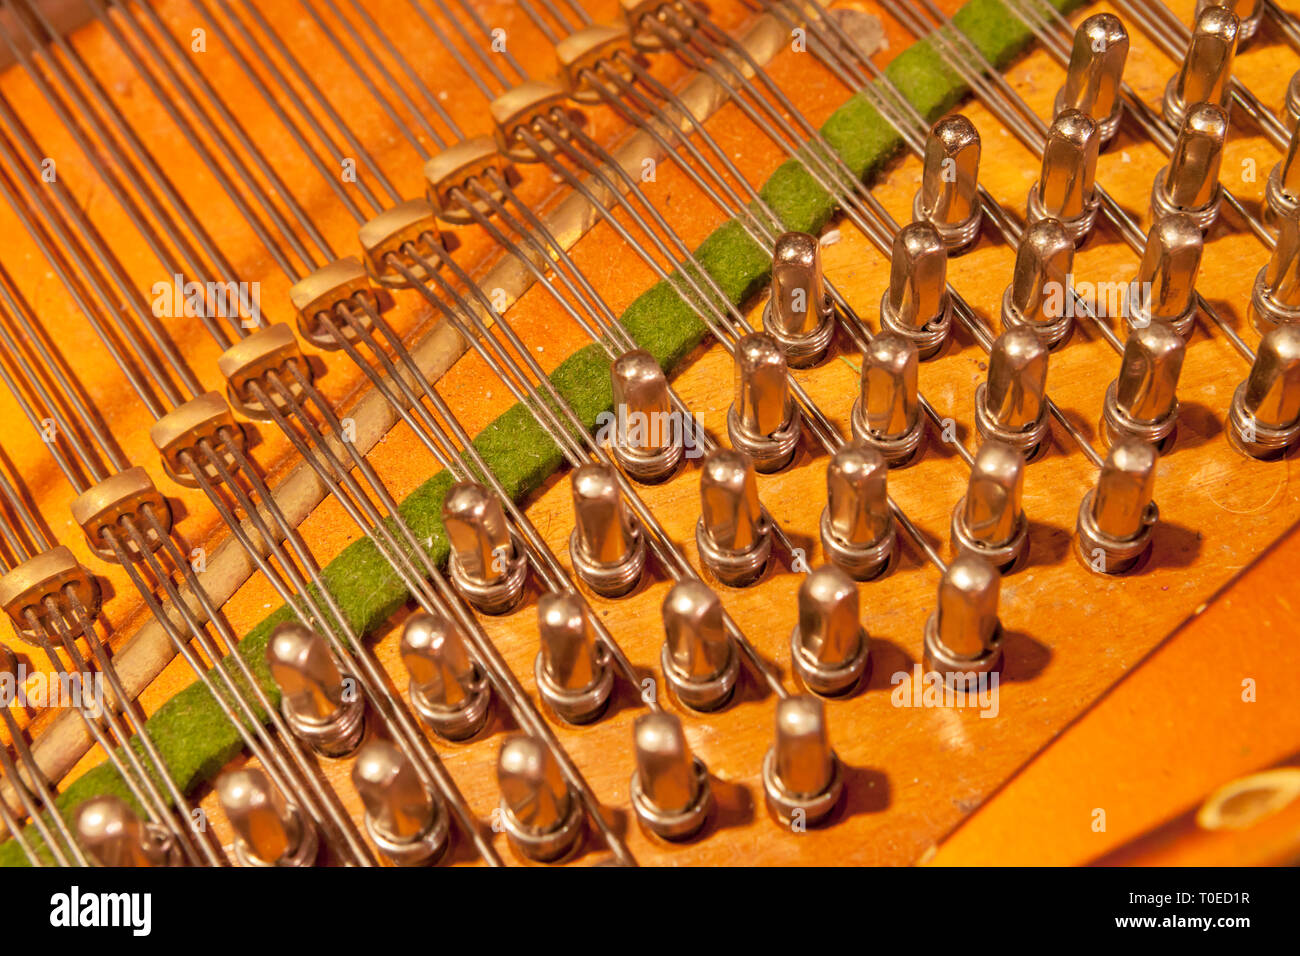 A grand piano with cover raised revealing piano interior. Stock Photo